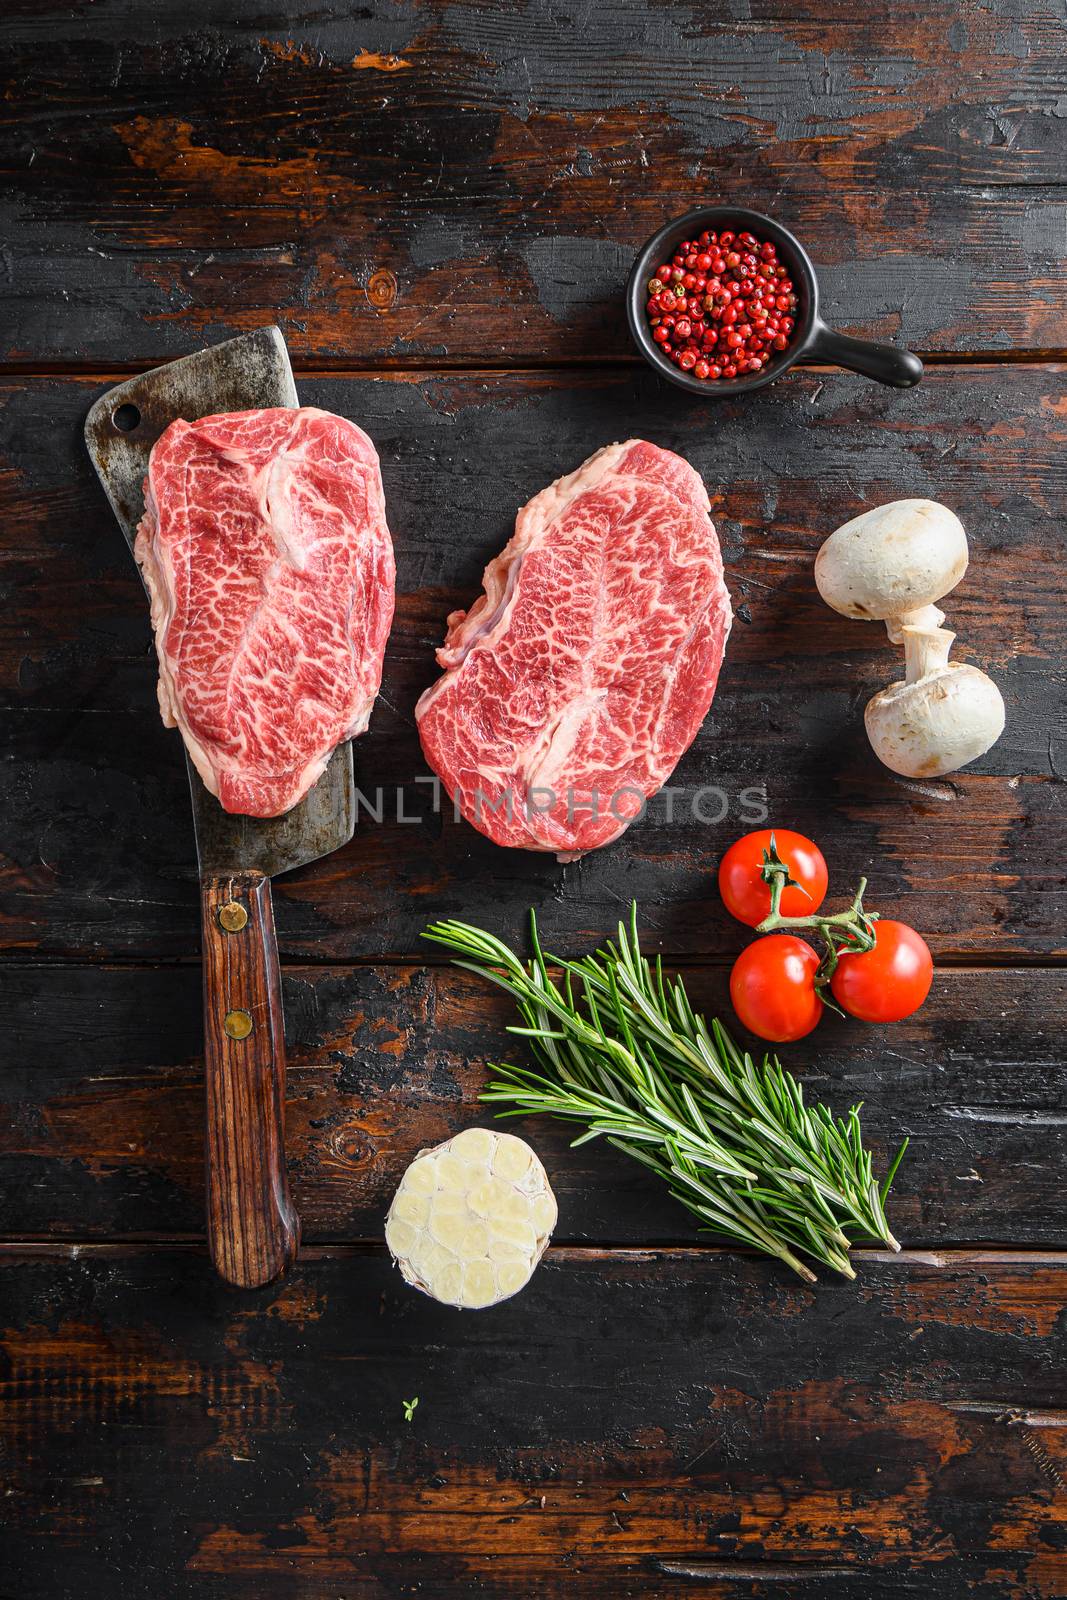 Organic Top blade steak, raw meat, marbled beef butler cut on metal butcher cleaver knife with rosemary and farm herbs over old wood table background top view.